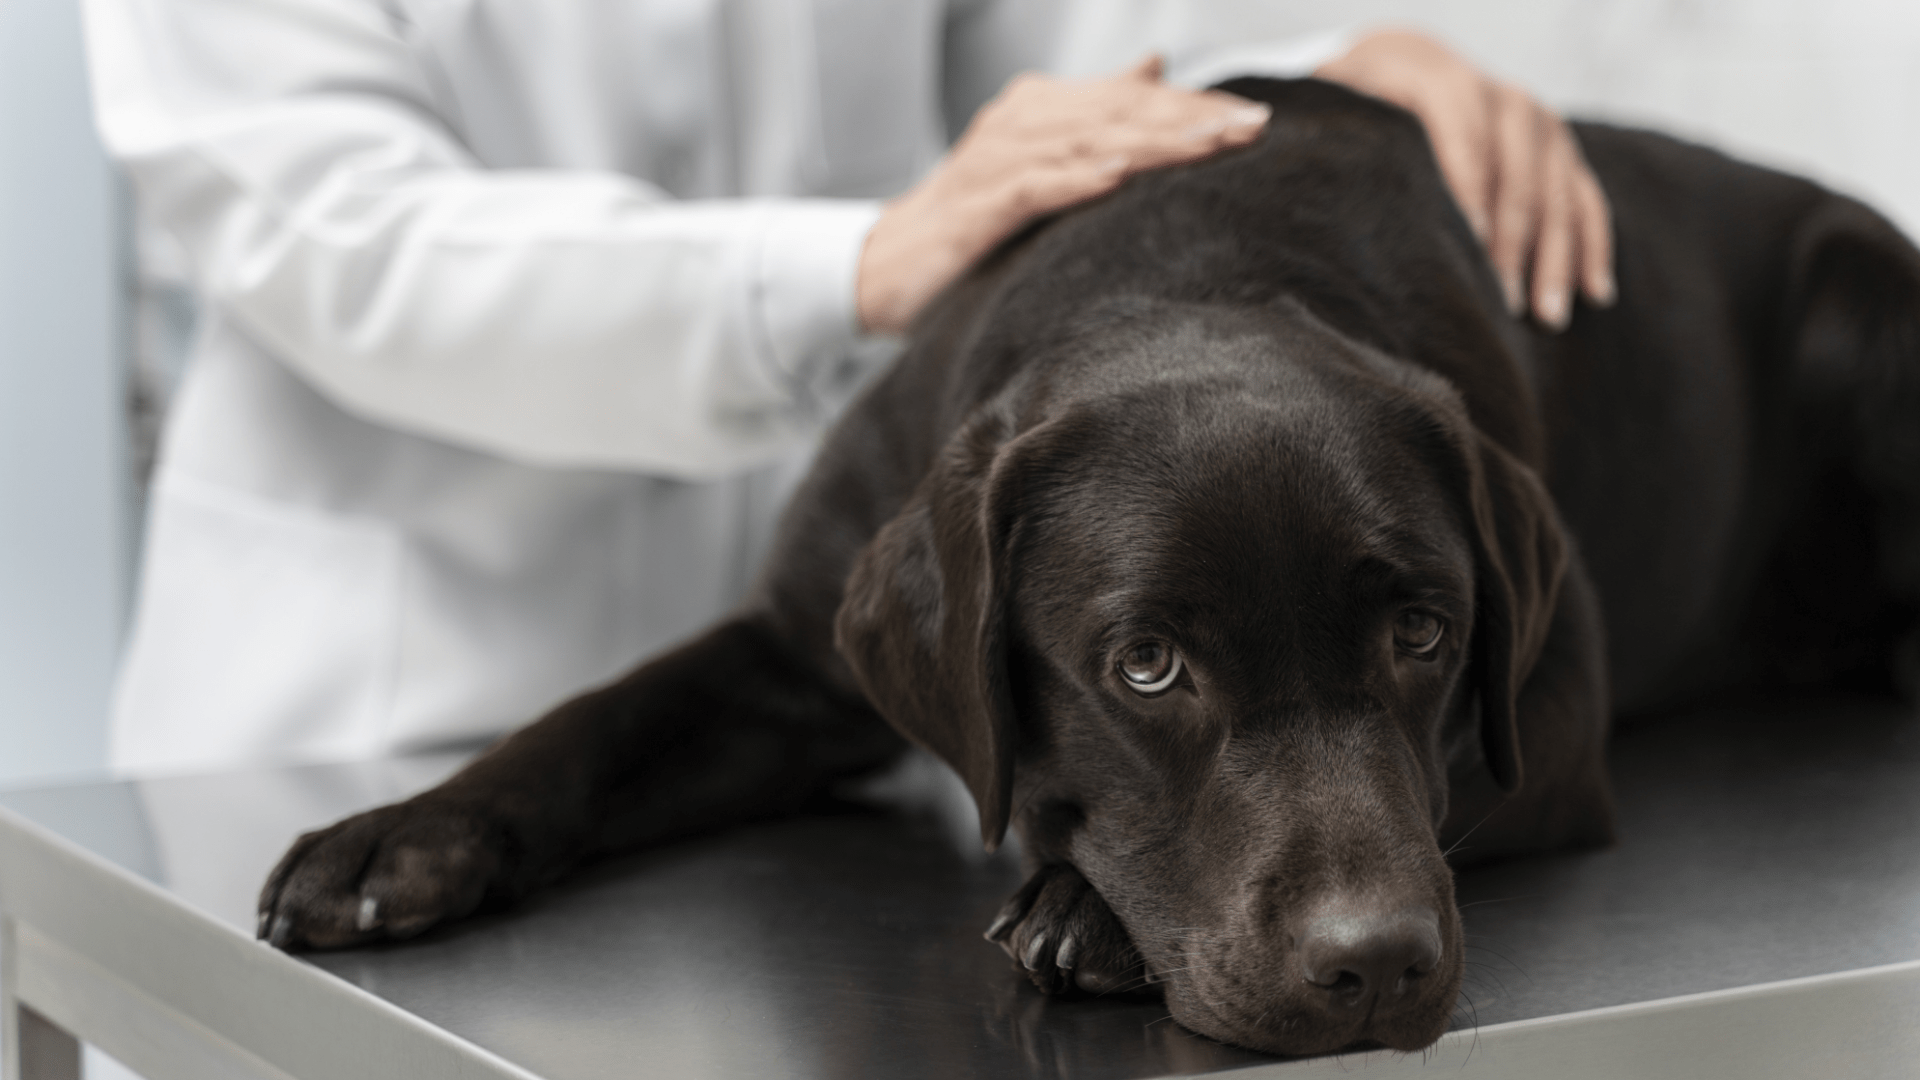 Black Labrador Retriever lying on the stainless steel examination table of the vet. The veterinarian is visible in the background wearing a white lab coat examining the dog's chest and abdomen with both hands. 